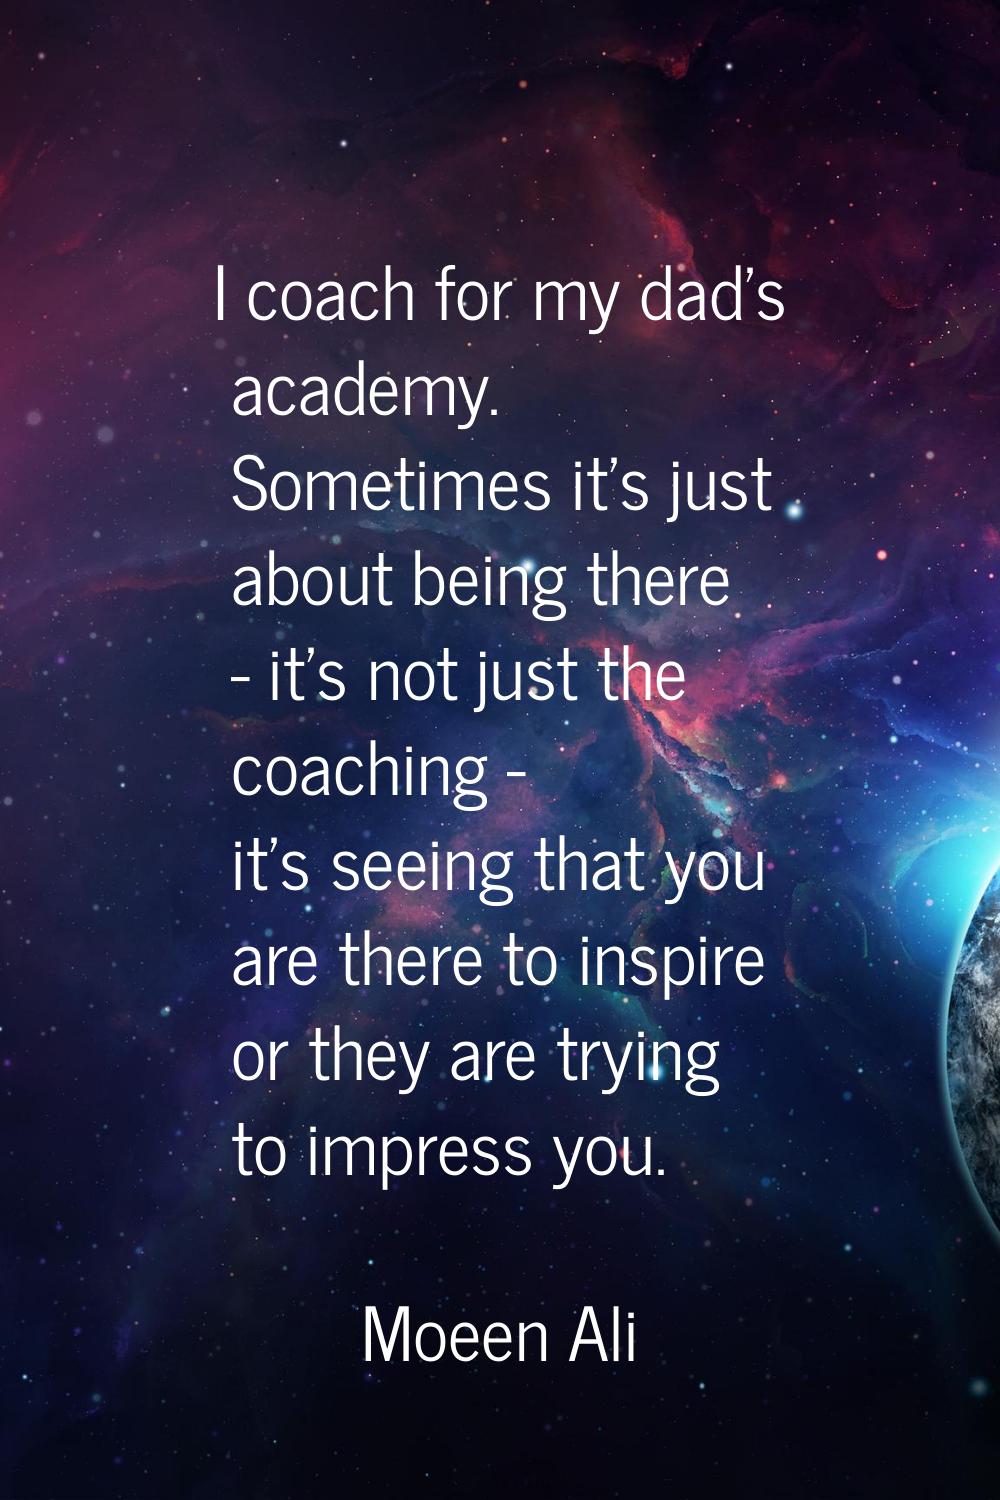 I coach for my dad's academy. Sometimes it's just about being there - it's not just the coaching - 